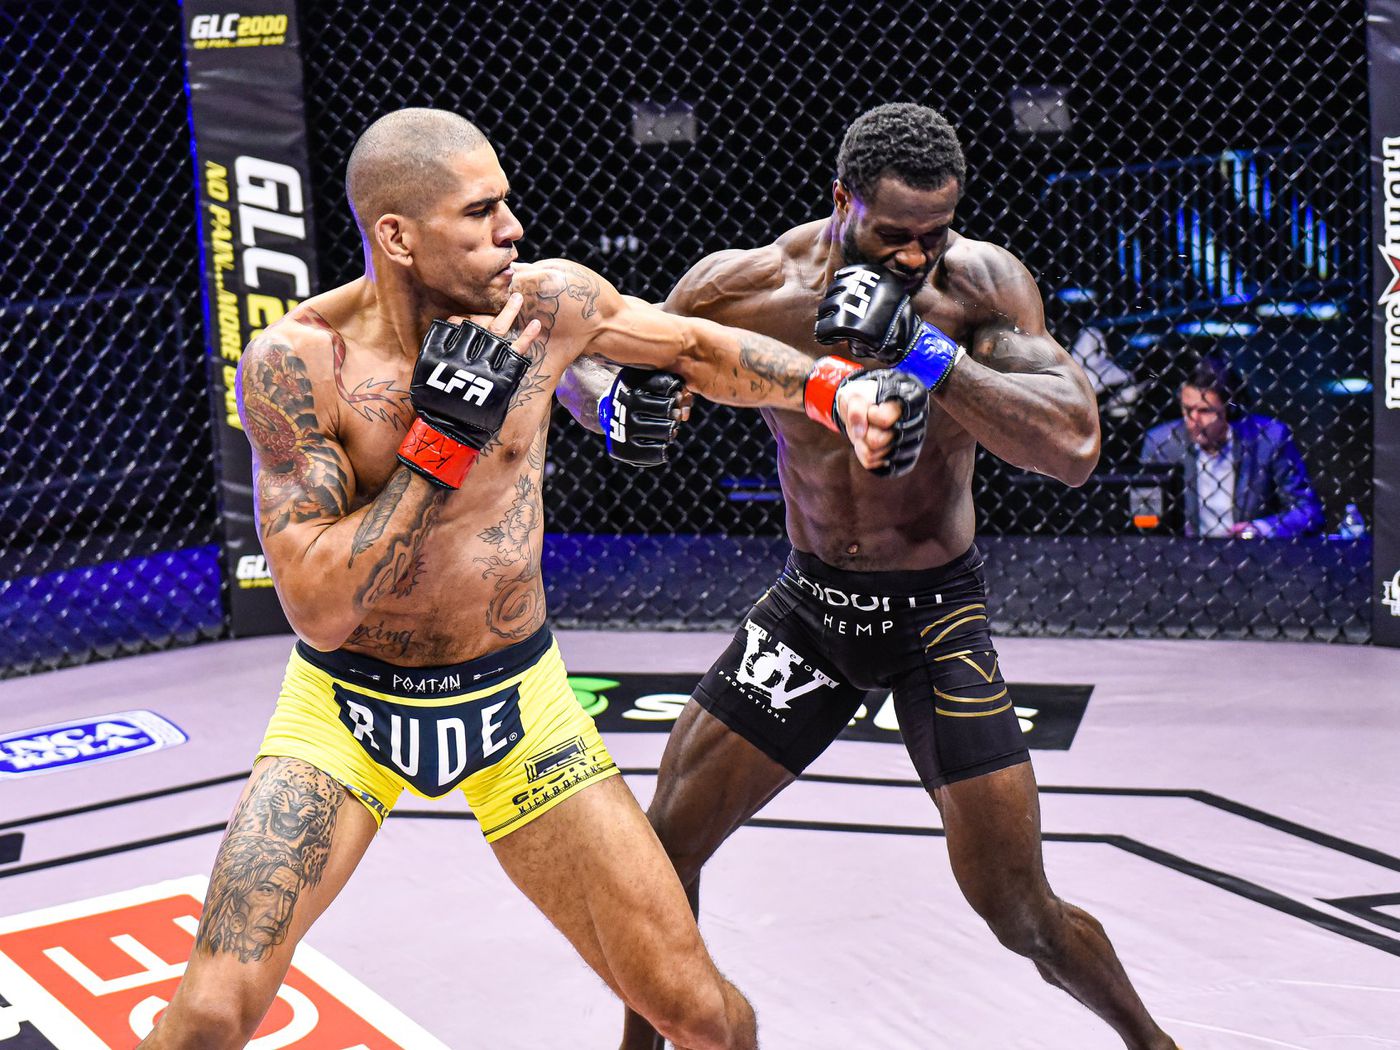 GLORY champion Alex Pereira targeted for UFC 268 debut vs. Andreas Michailidis